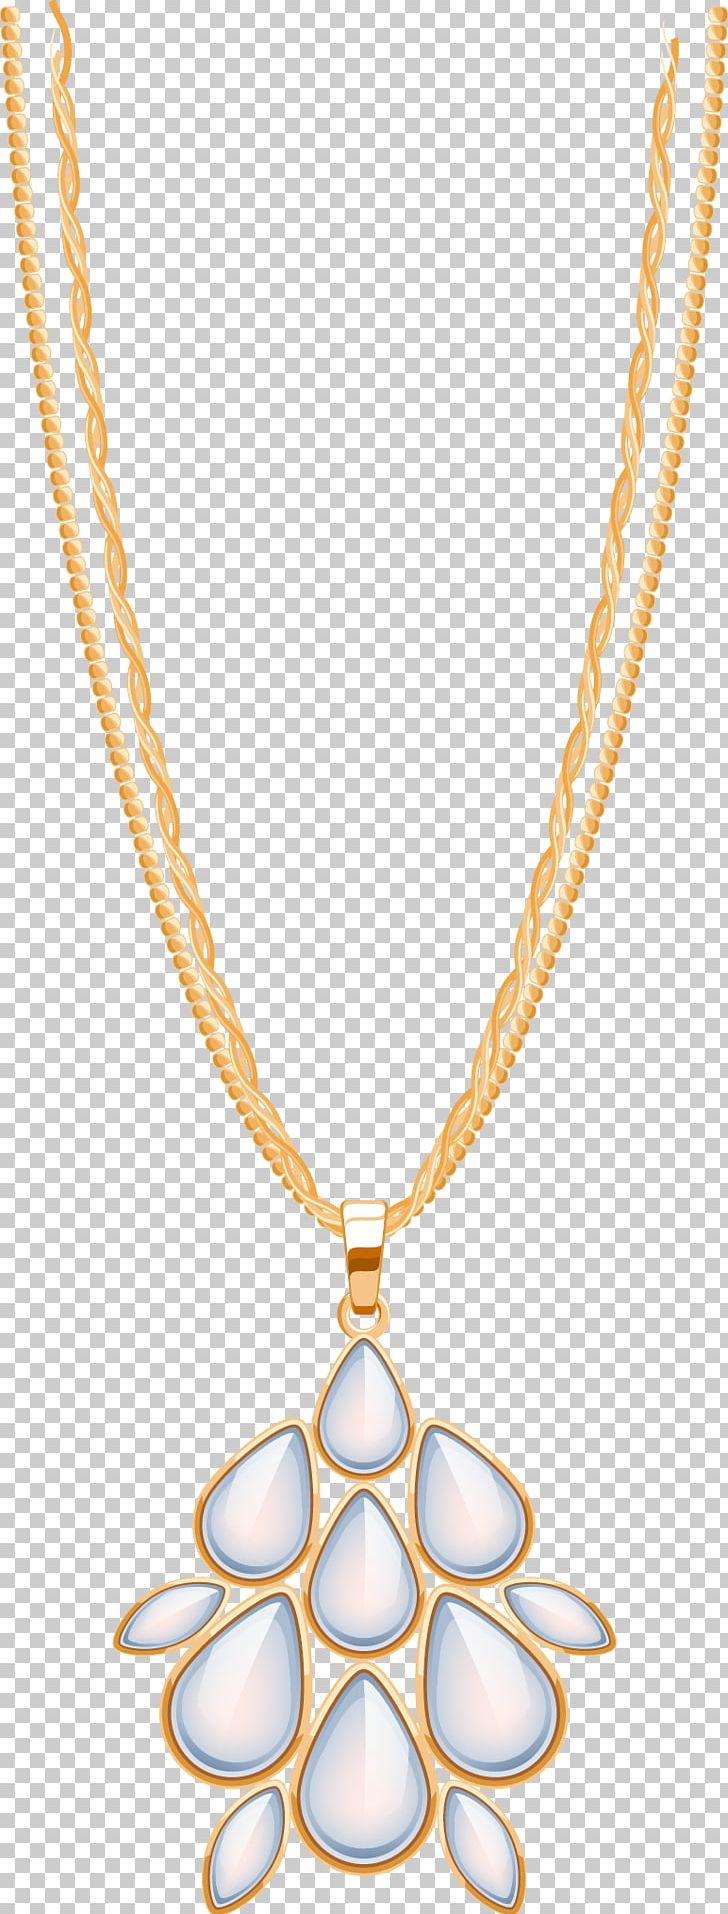 Necklace Pendant Chain Diamond Jewellery PNG, Clipart, Body Jewelry, Bright, Brilliant, Brooch, Circle Free PNG Download